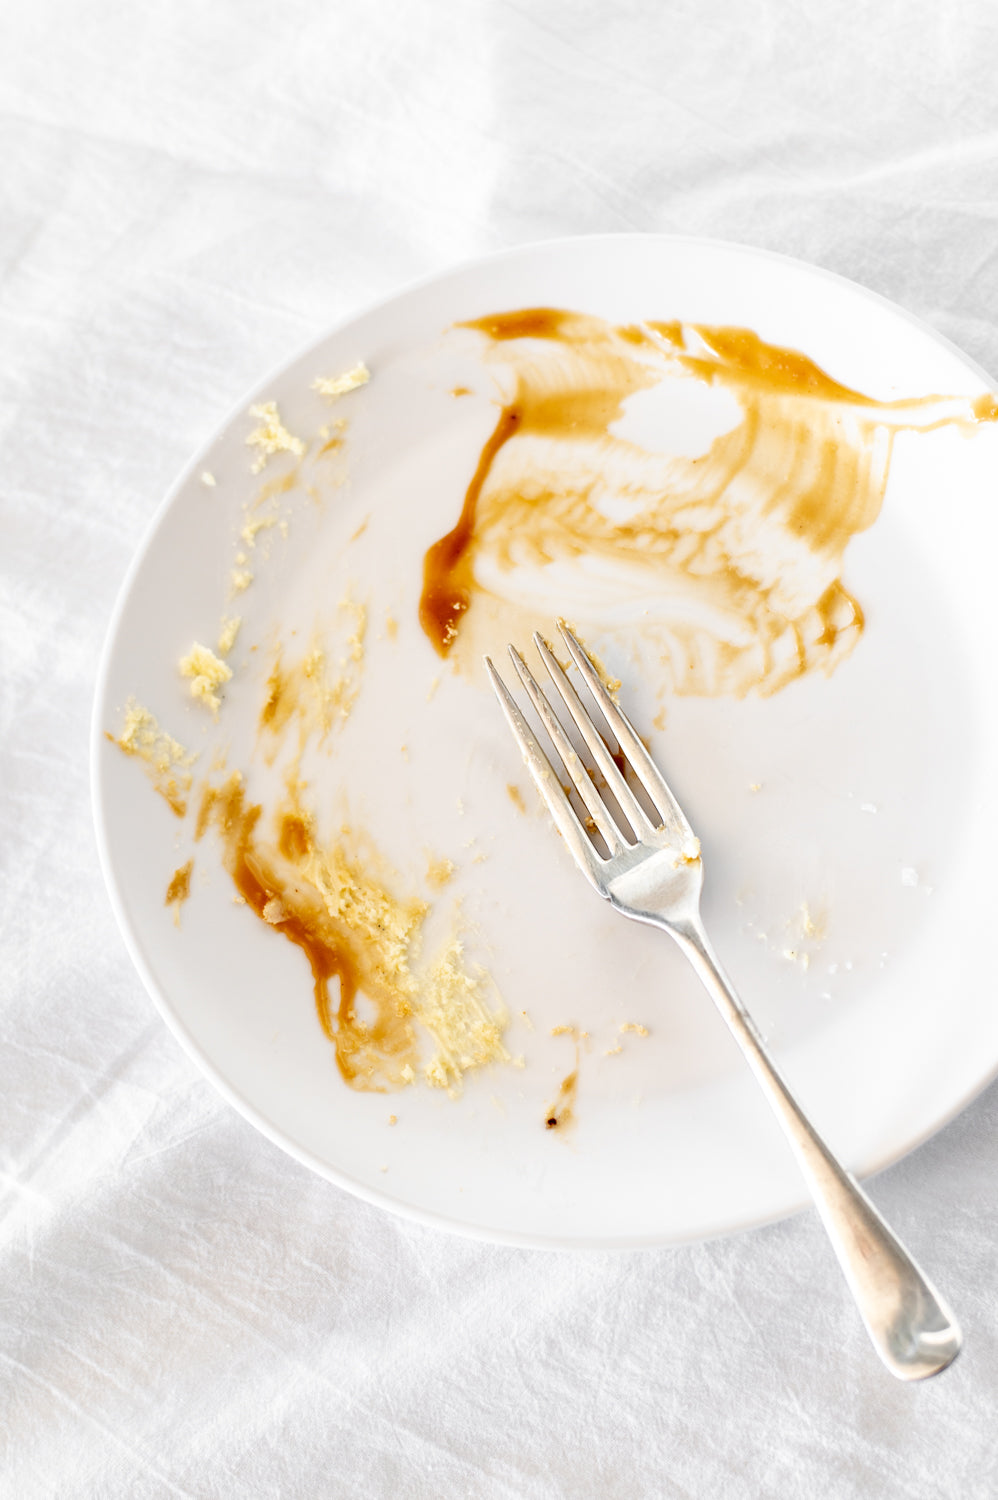 An empty plate with a fork and caramel scrapings